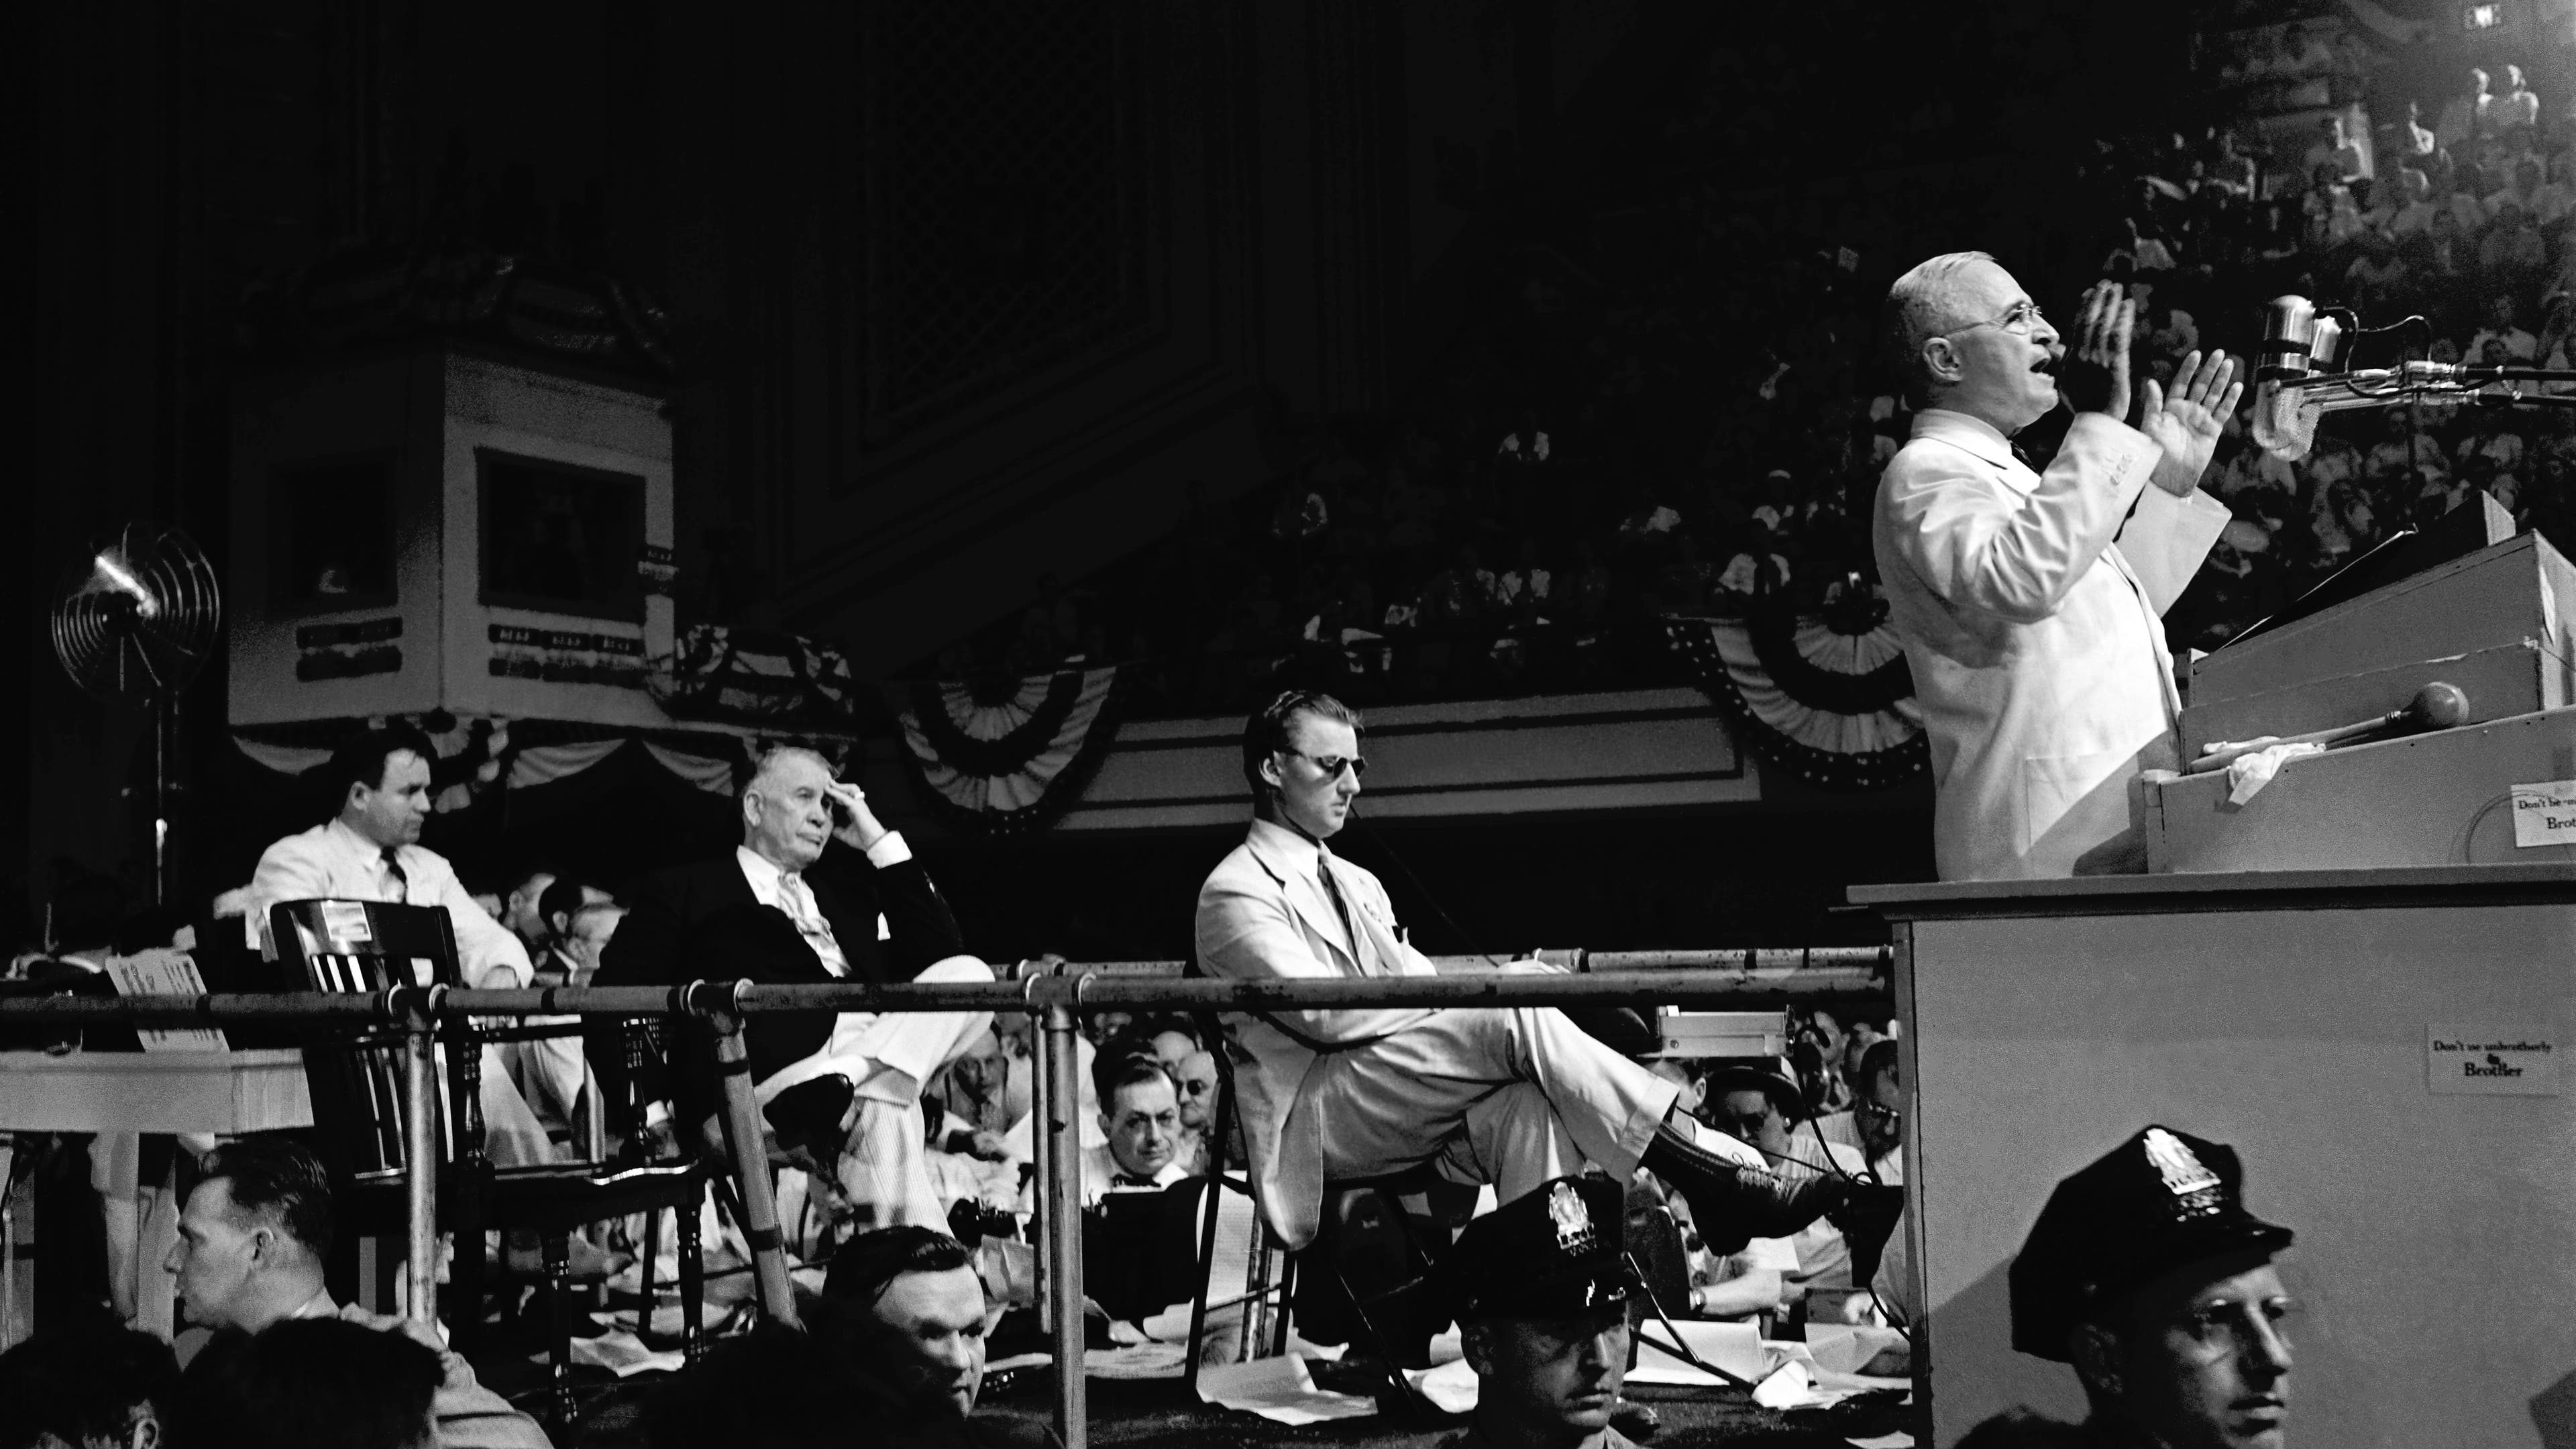 American politician and United States President Harry S. Truman (1884-1972) speaks from the dais at the Convention Hall as Vice President Alben W. Barkley (1877-1956) looks on during the Democratic National Convention on July 14, 1948 in Philadelphia, Pennsylvania.